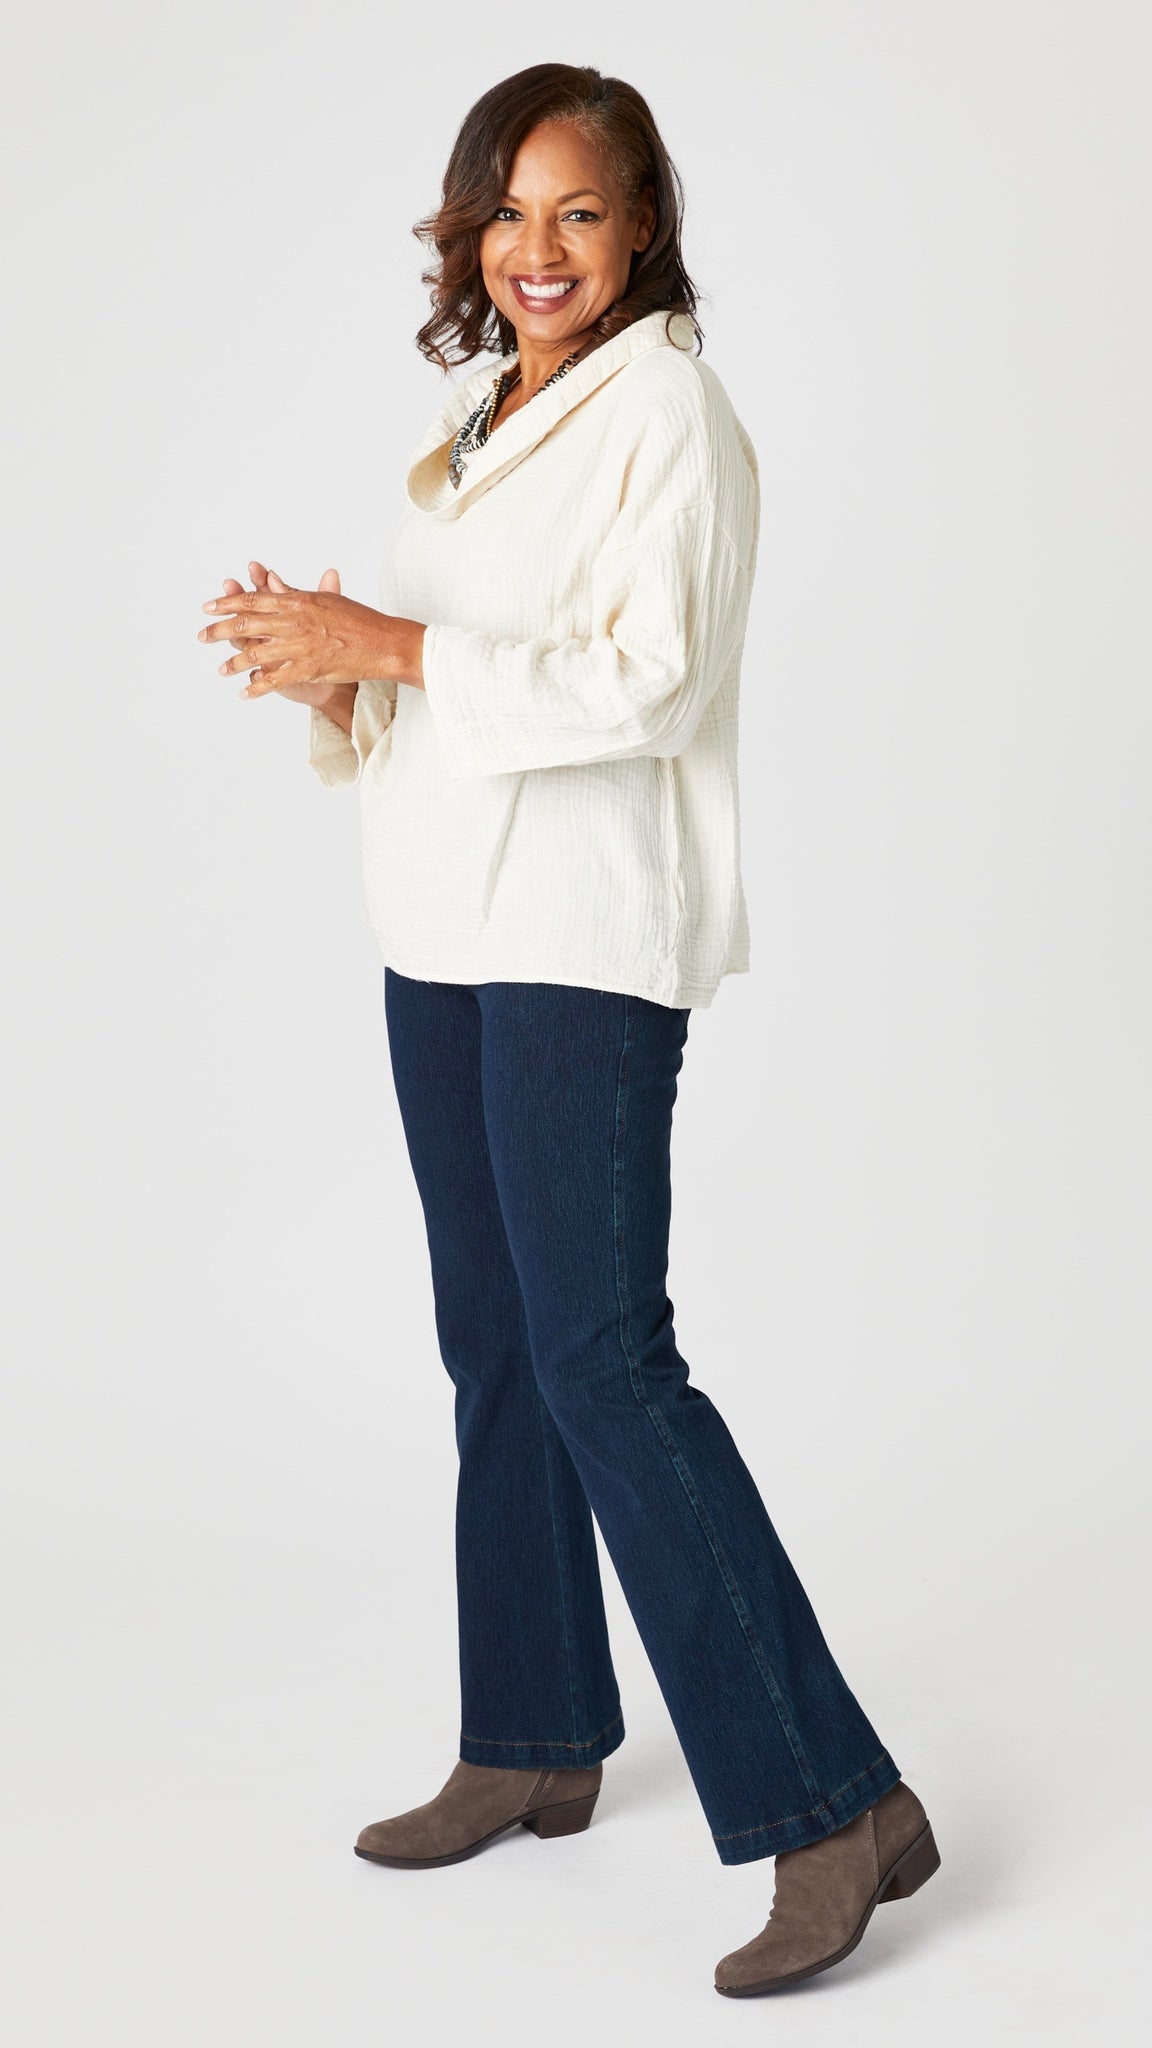 Model wearing cream double cotton cowl neck top with 3/4 sleeves, natural waist hemline and boxy fit, with indigo bootcut jeans, and gray suede boots.